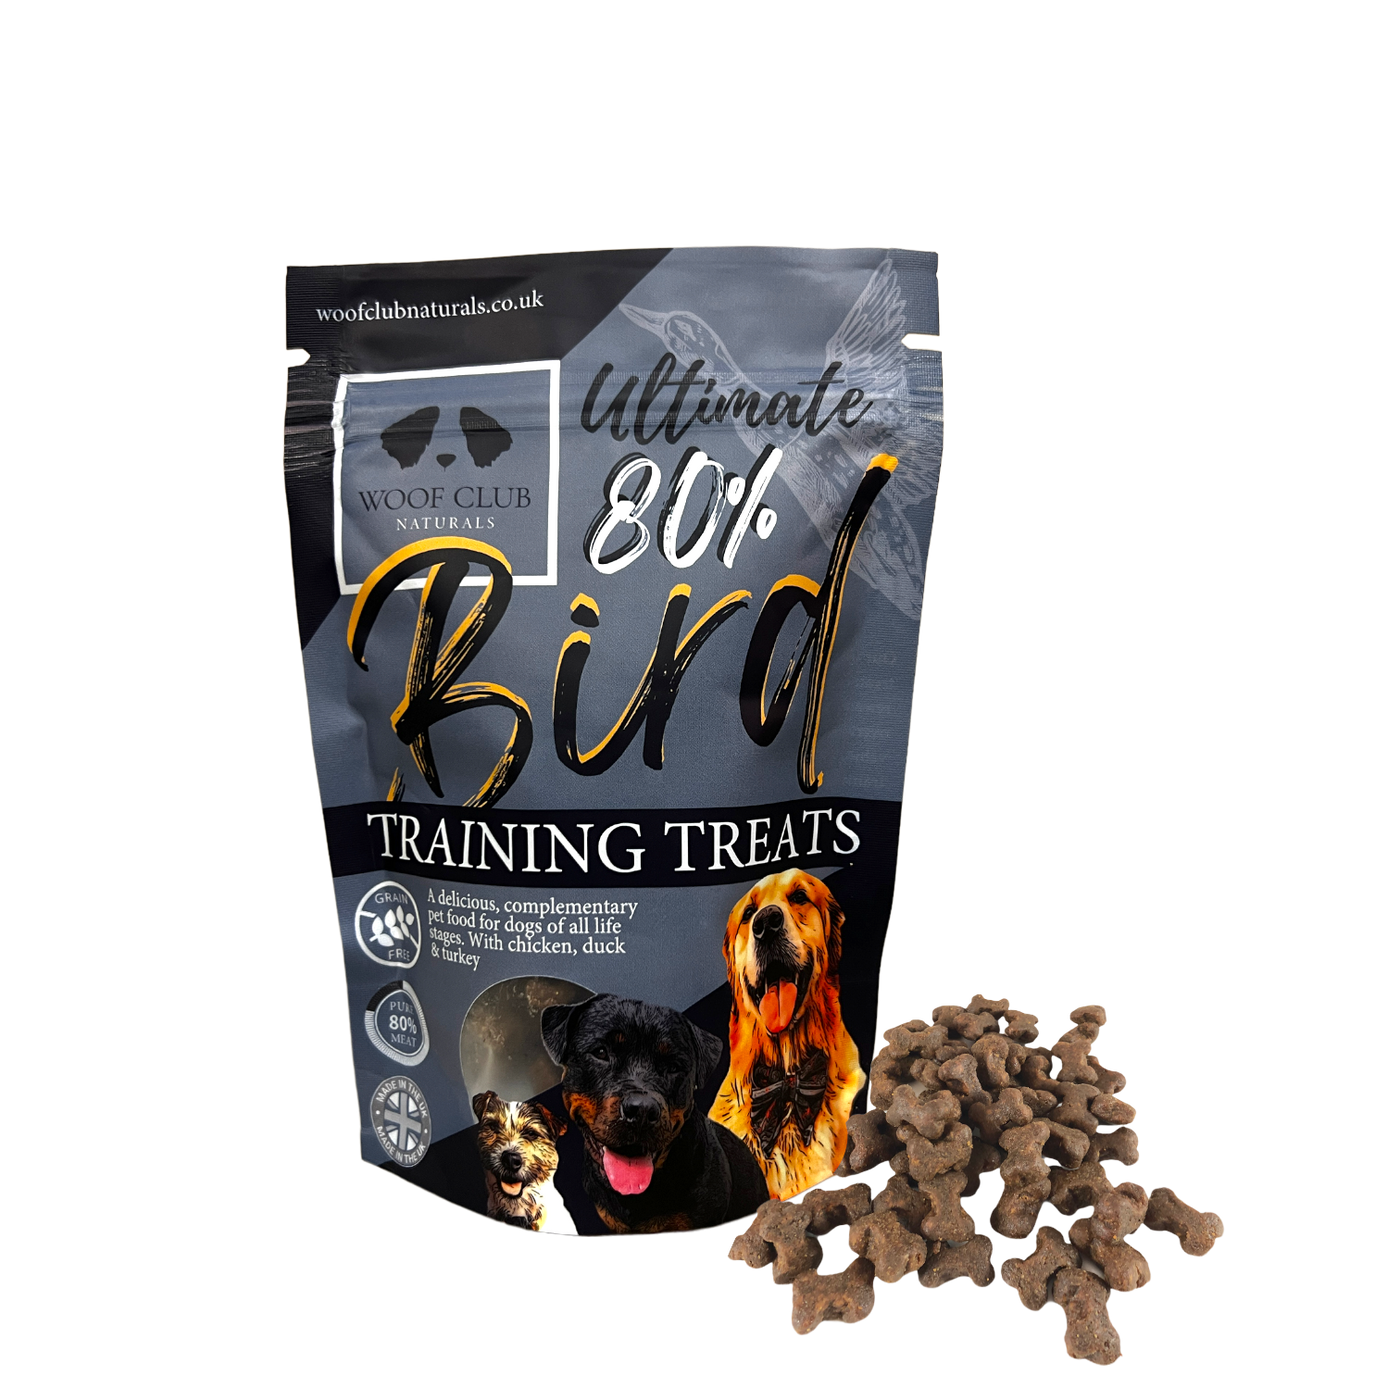 Ultimate Training Treats by Woof Club Naturals